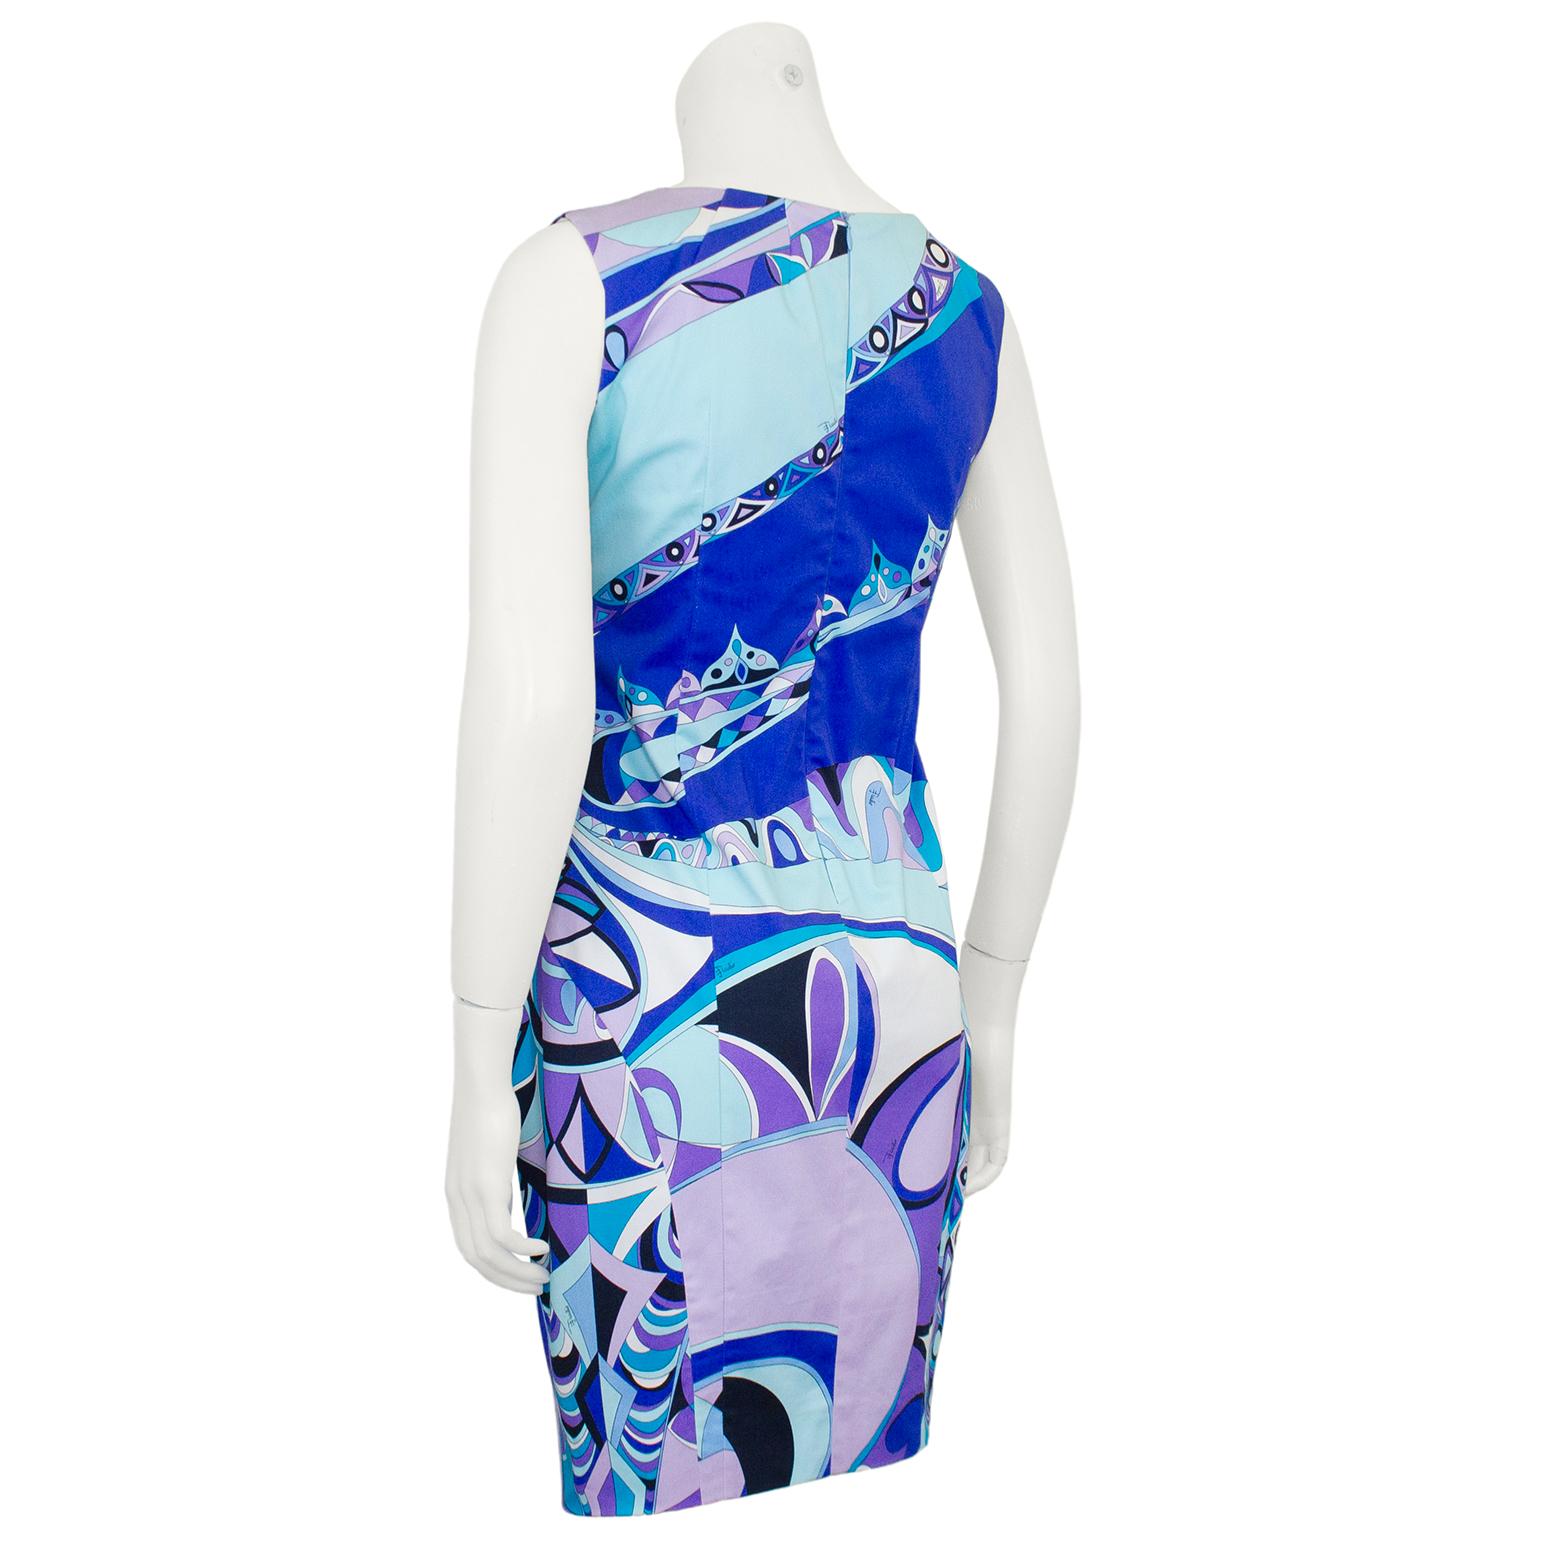 Early 2000s Emilio Pucci Blue and Purple Tone Cotton Dress  In Good Condition For Sale In Toronto, Ontario